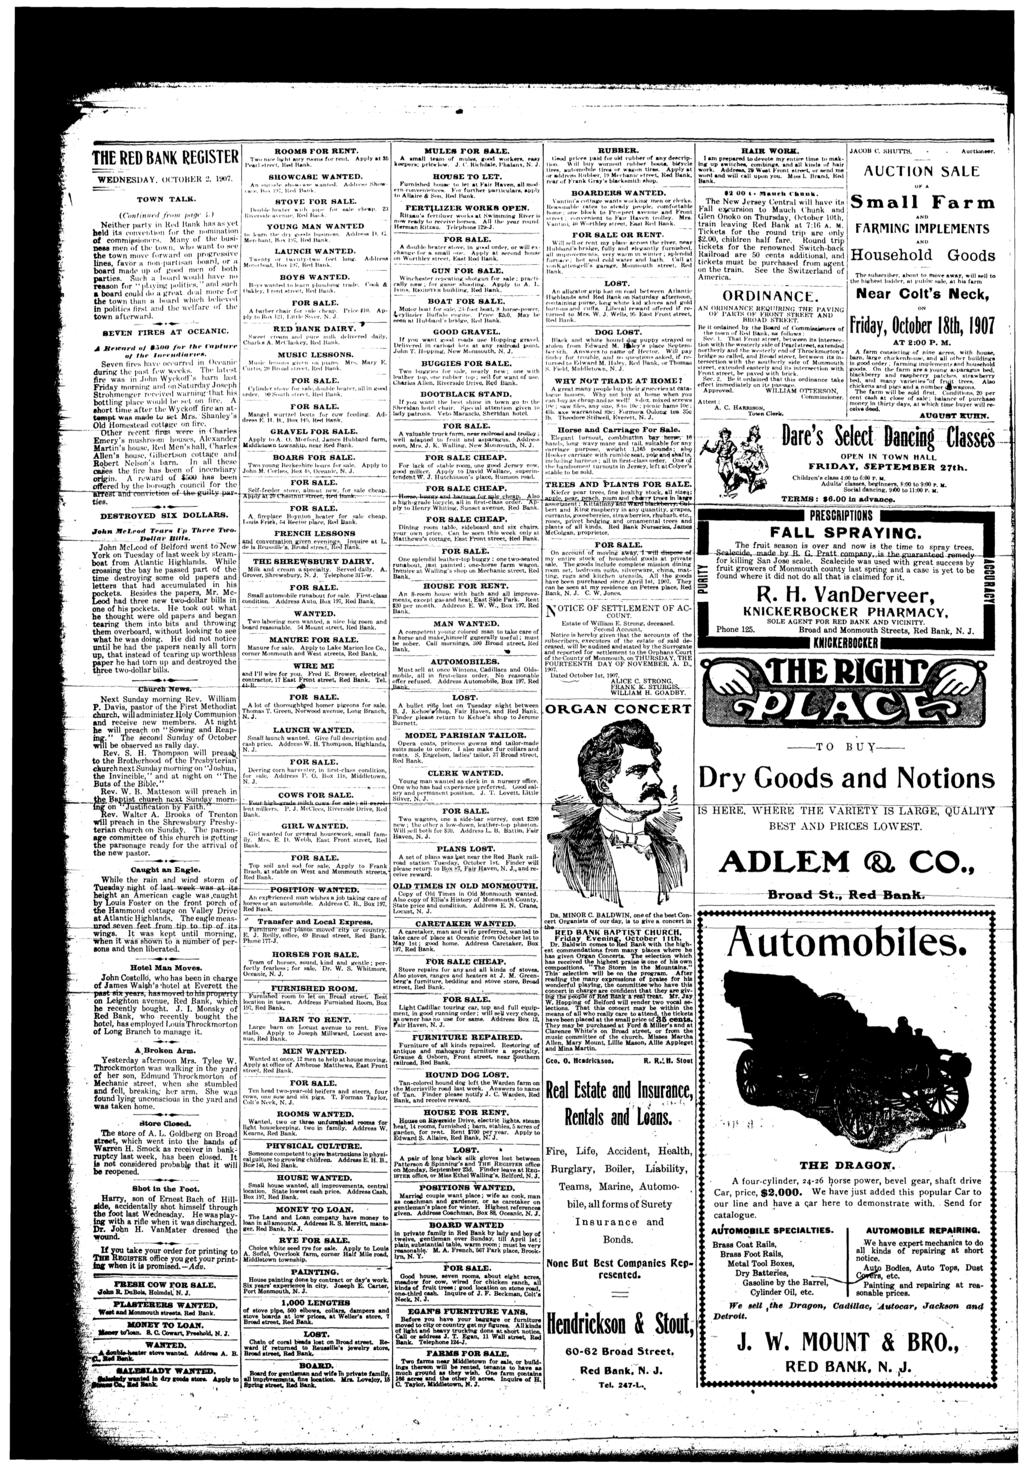 THE RED BANK REGSTER WEDNESDAY. OCTOBER 2, 1907. TOWN TALK. (Contnn from putj' {.) Nether party n Hwl Hunk ha«ns yut held ts conventon for the nomnaton of commpa»n«th.